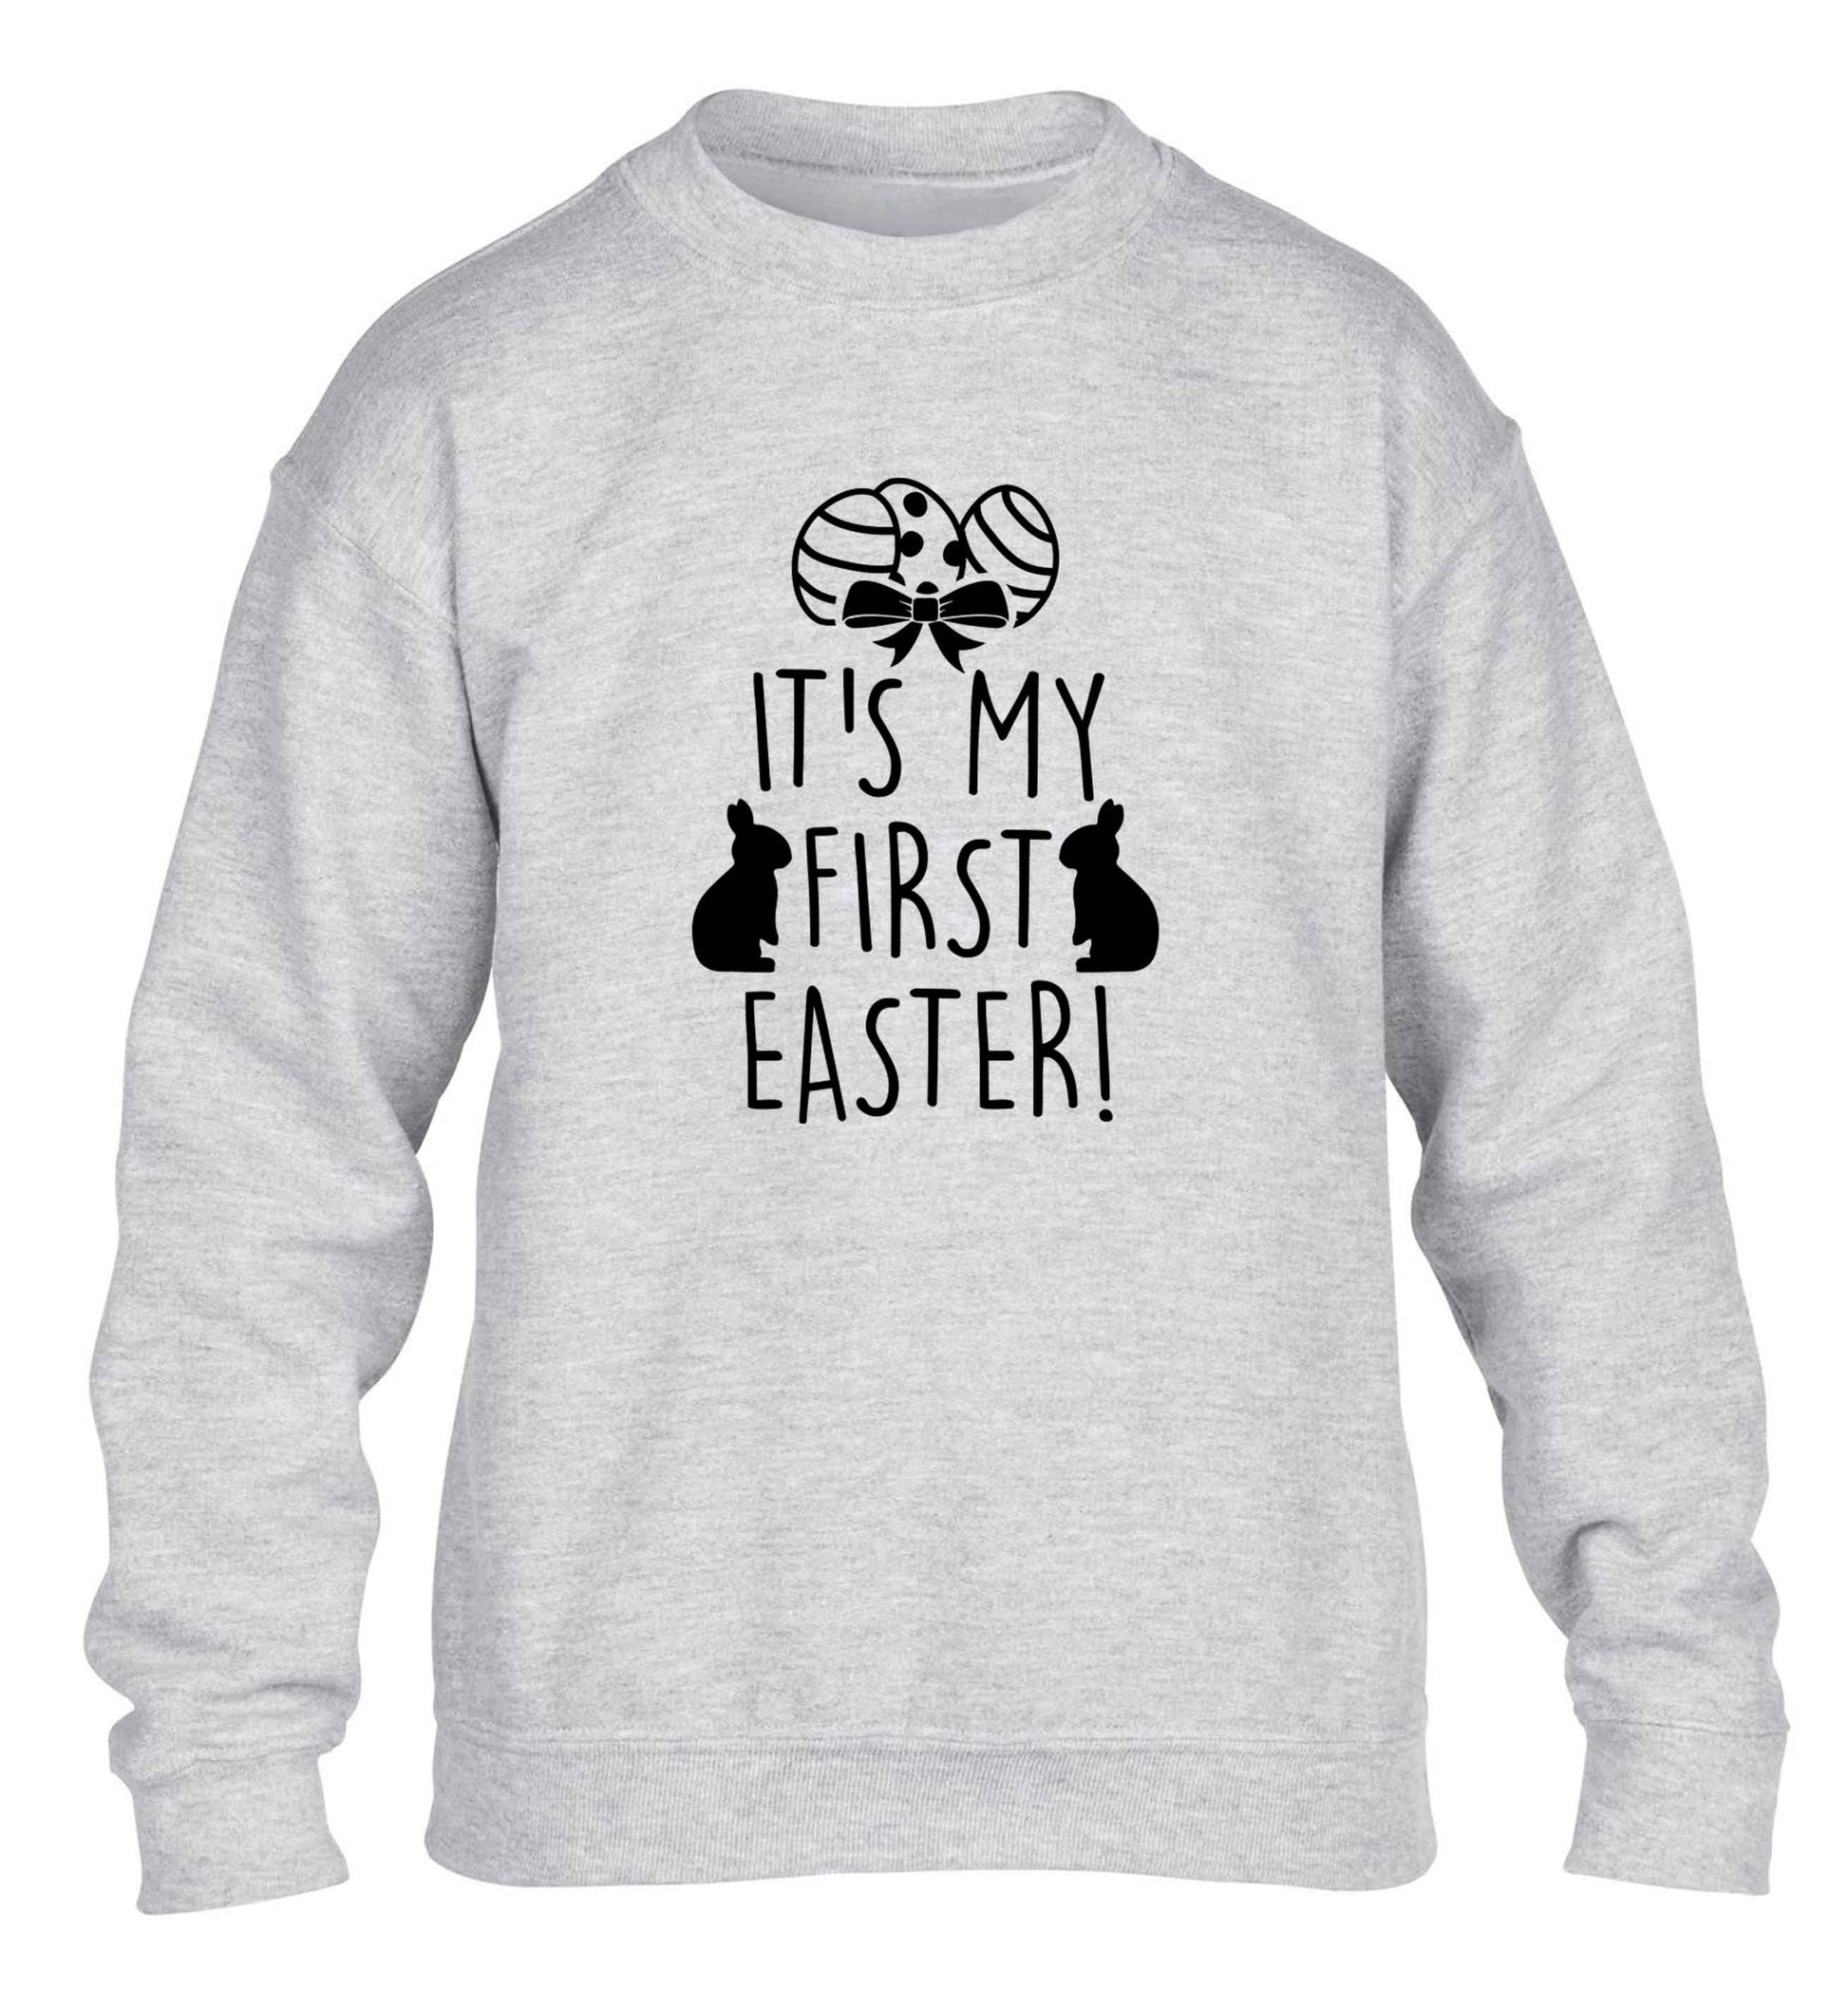 It's my first Easter children's grey sweater 12-13 Years